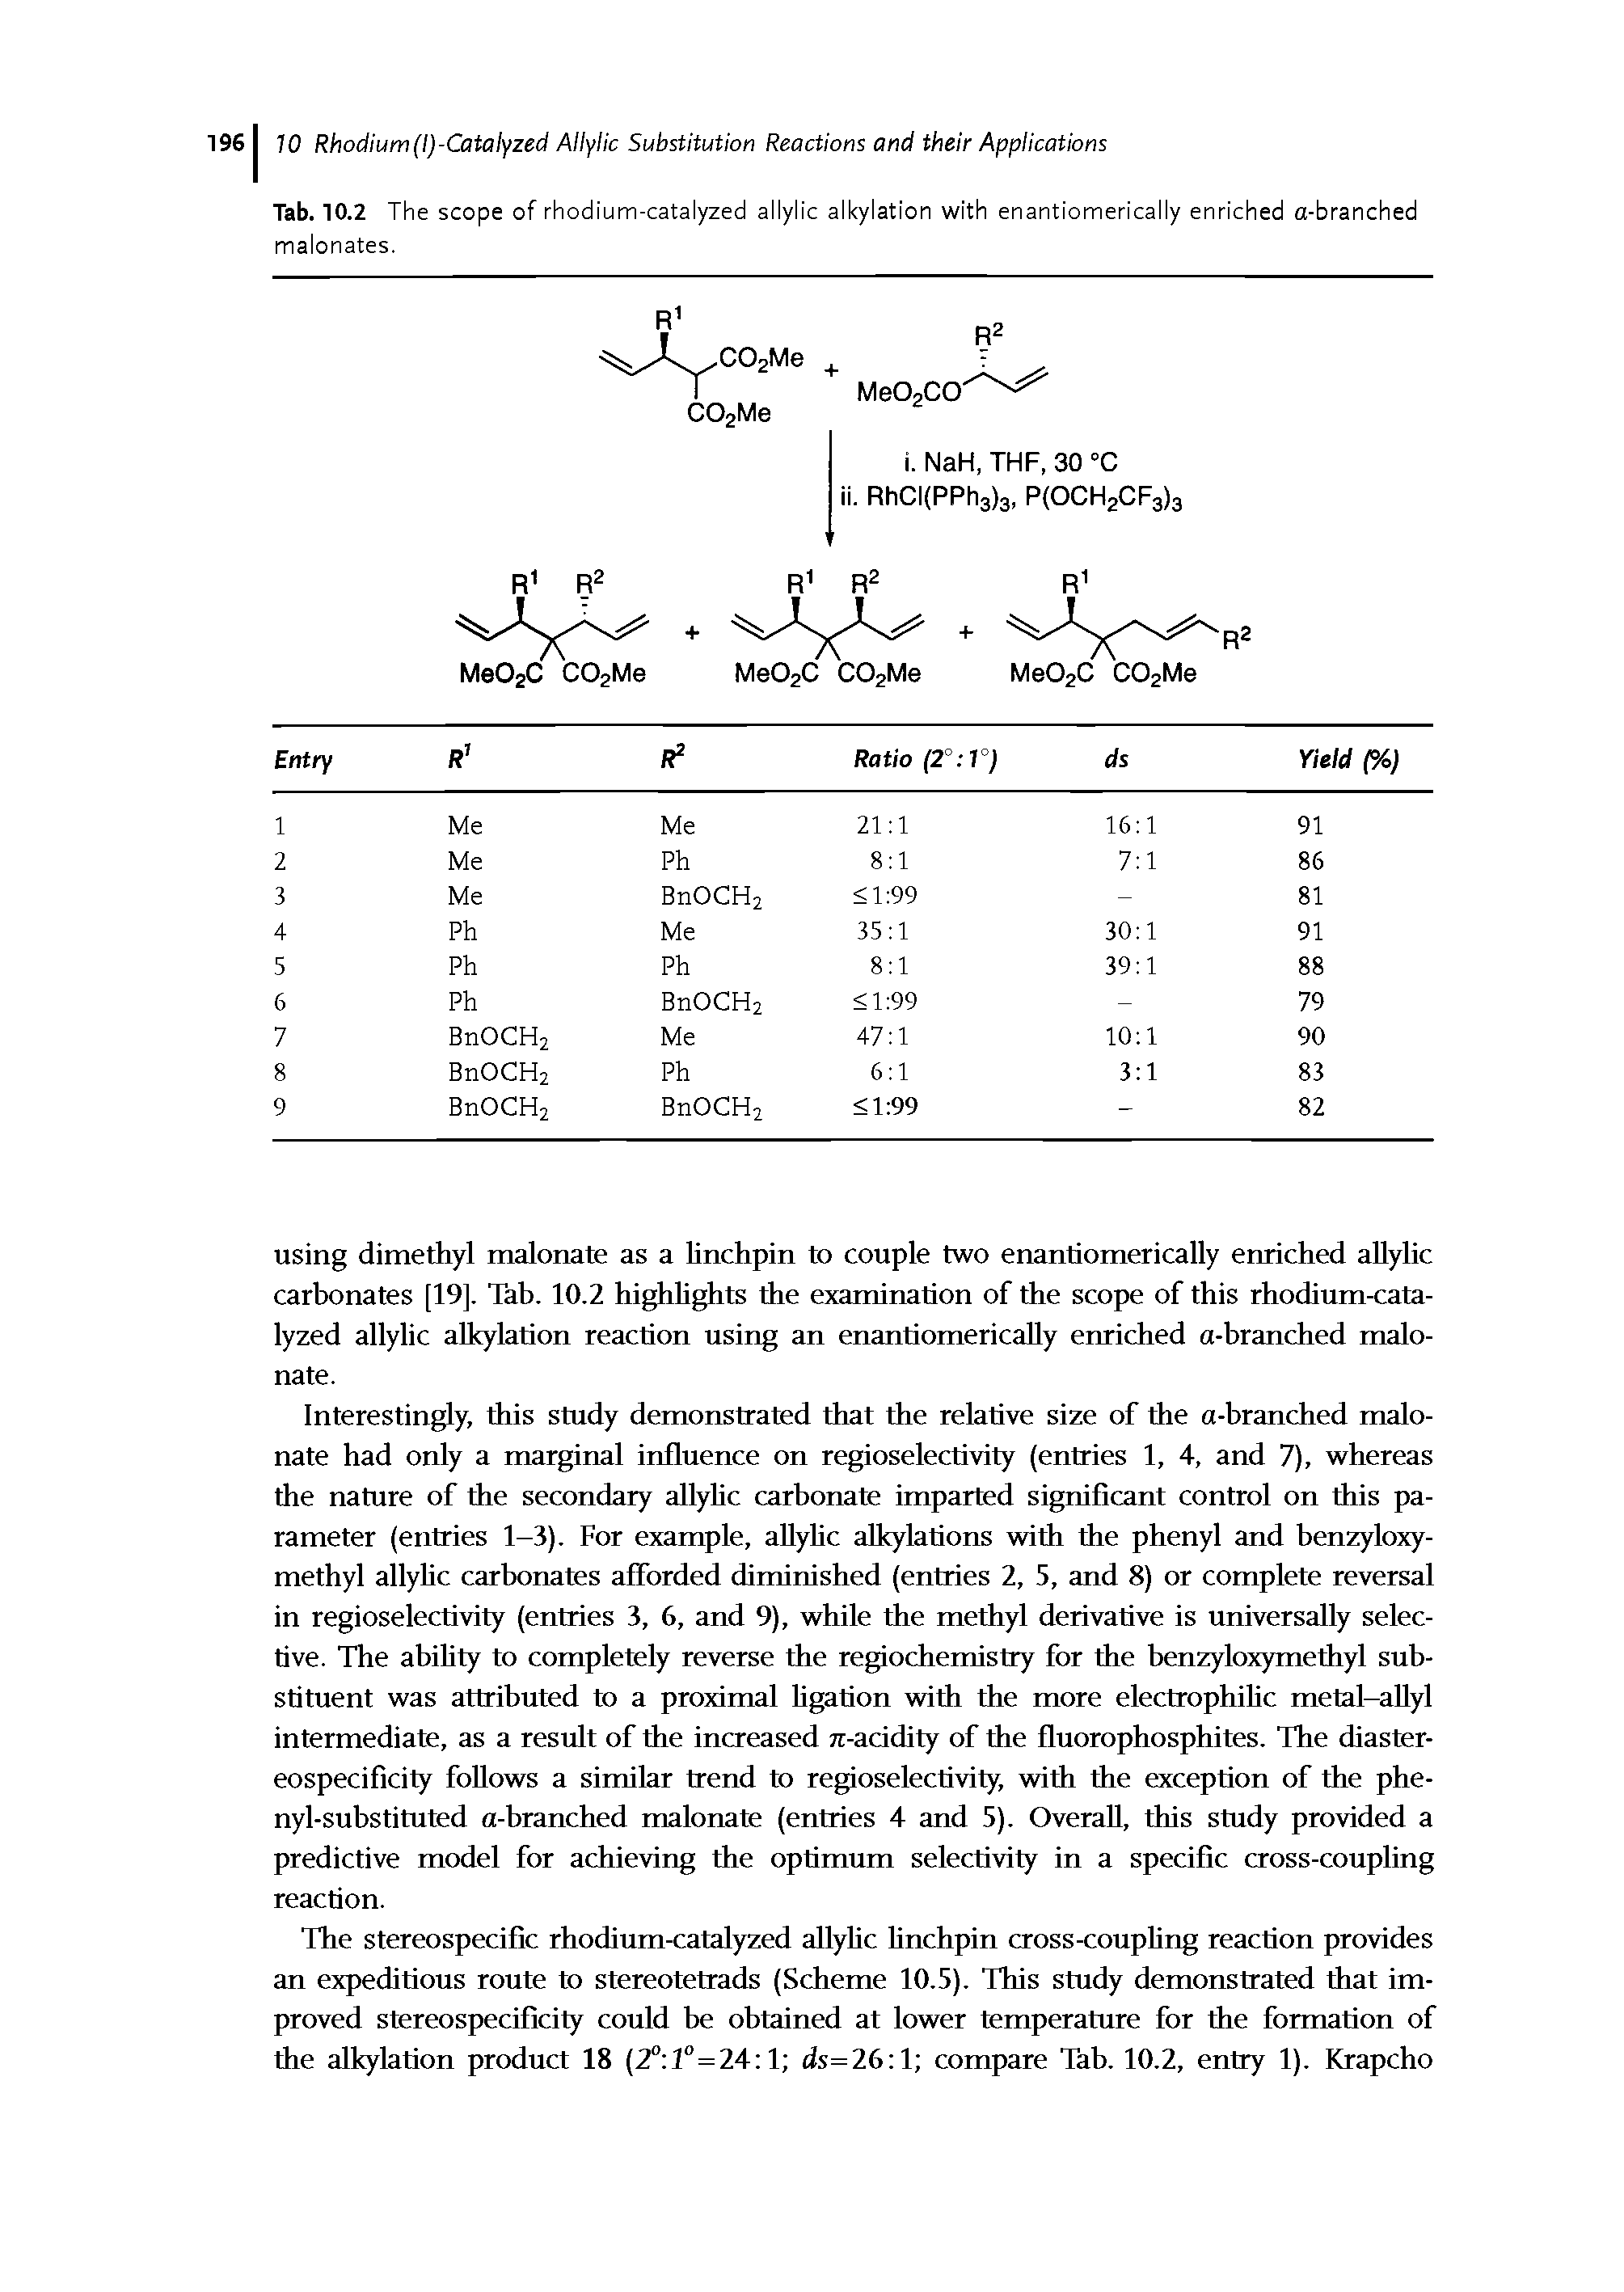 Tab. 10.2 The scope of rhodium-catalyzed allylic alkylation with enantiomerically enriched a-branched malonates.